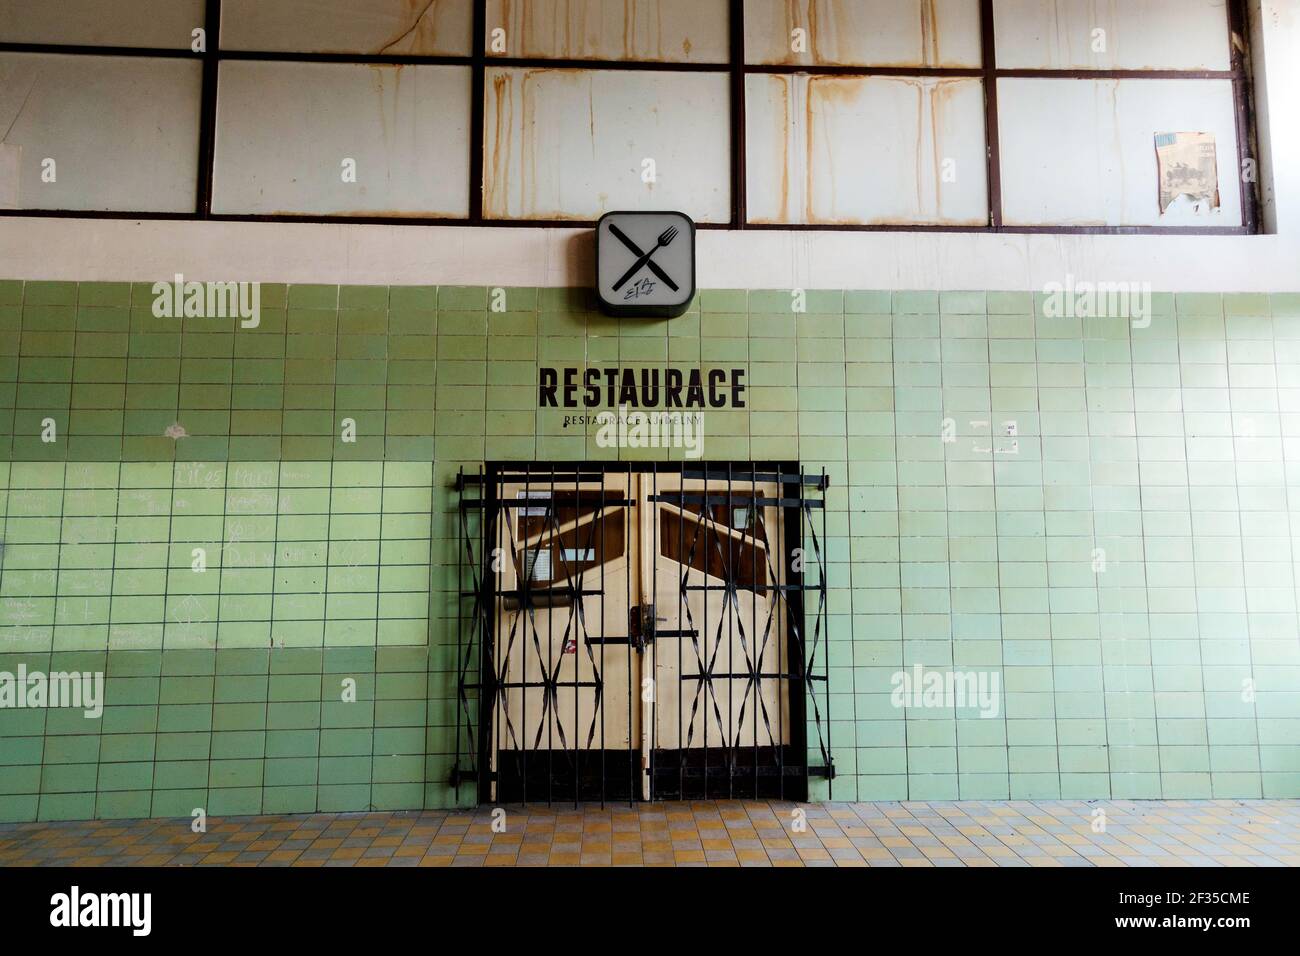 Closed railway station restaurant, sign, typical design from the 80s Czech Republic still life with the memory of the communist era, grids  tiles dirt Stock Photo